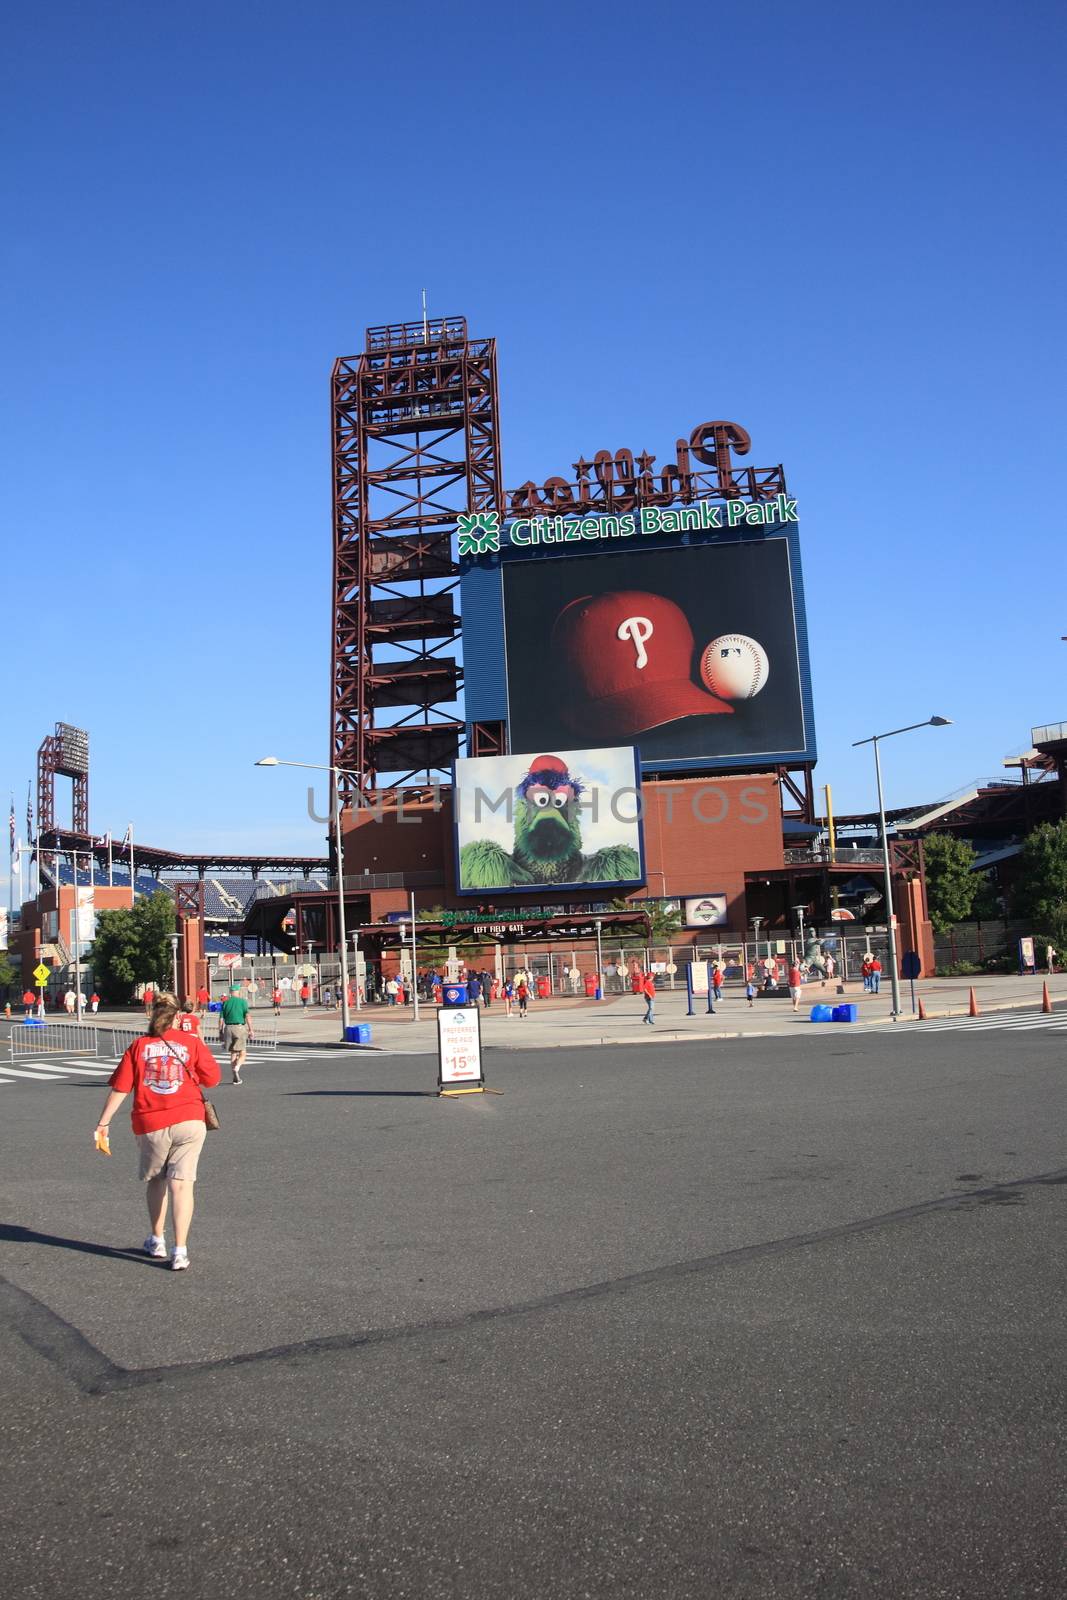 Citizens Bank Park - Philadelpia Phillies by Ffooter